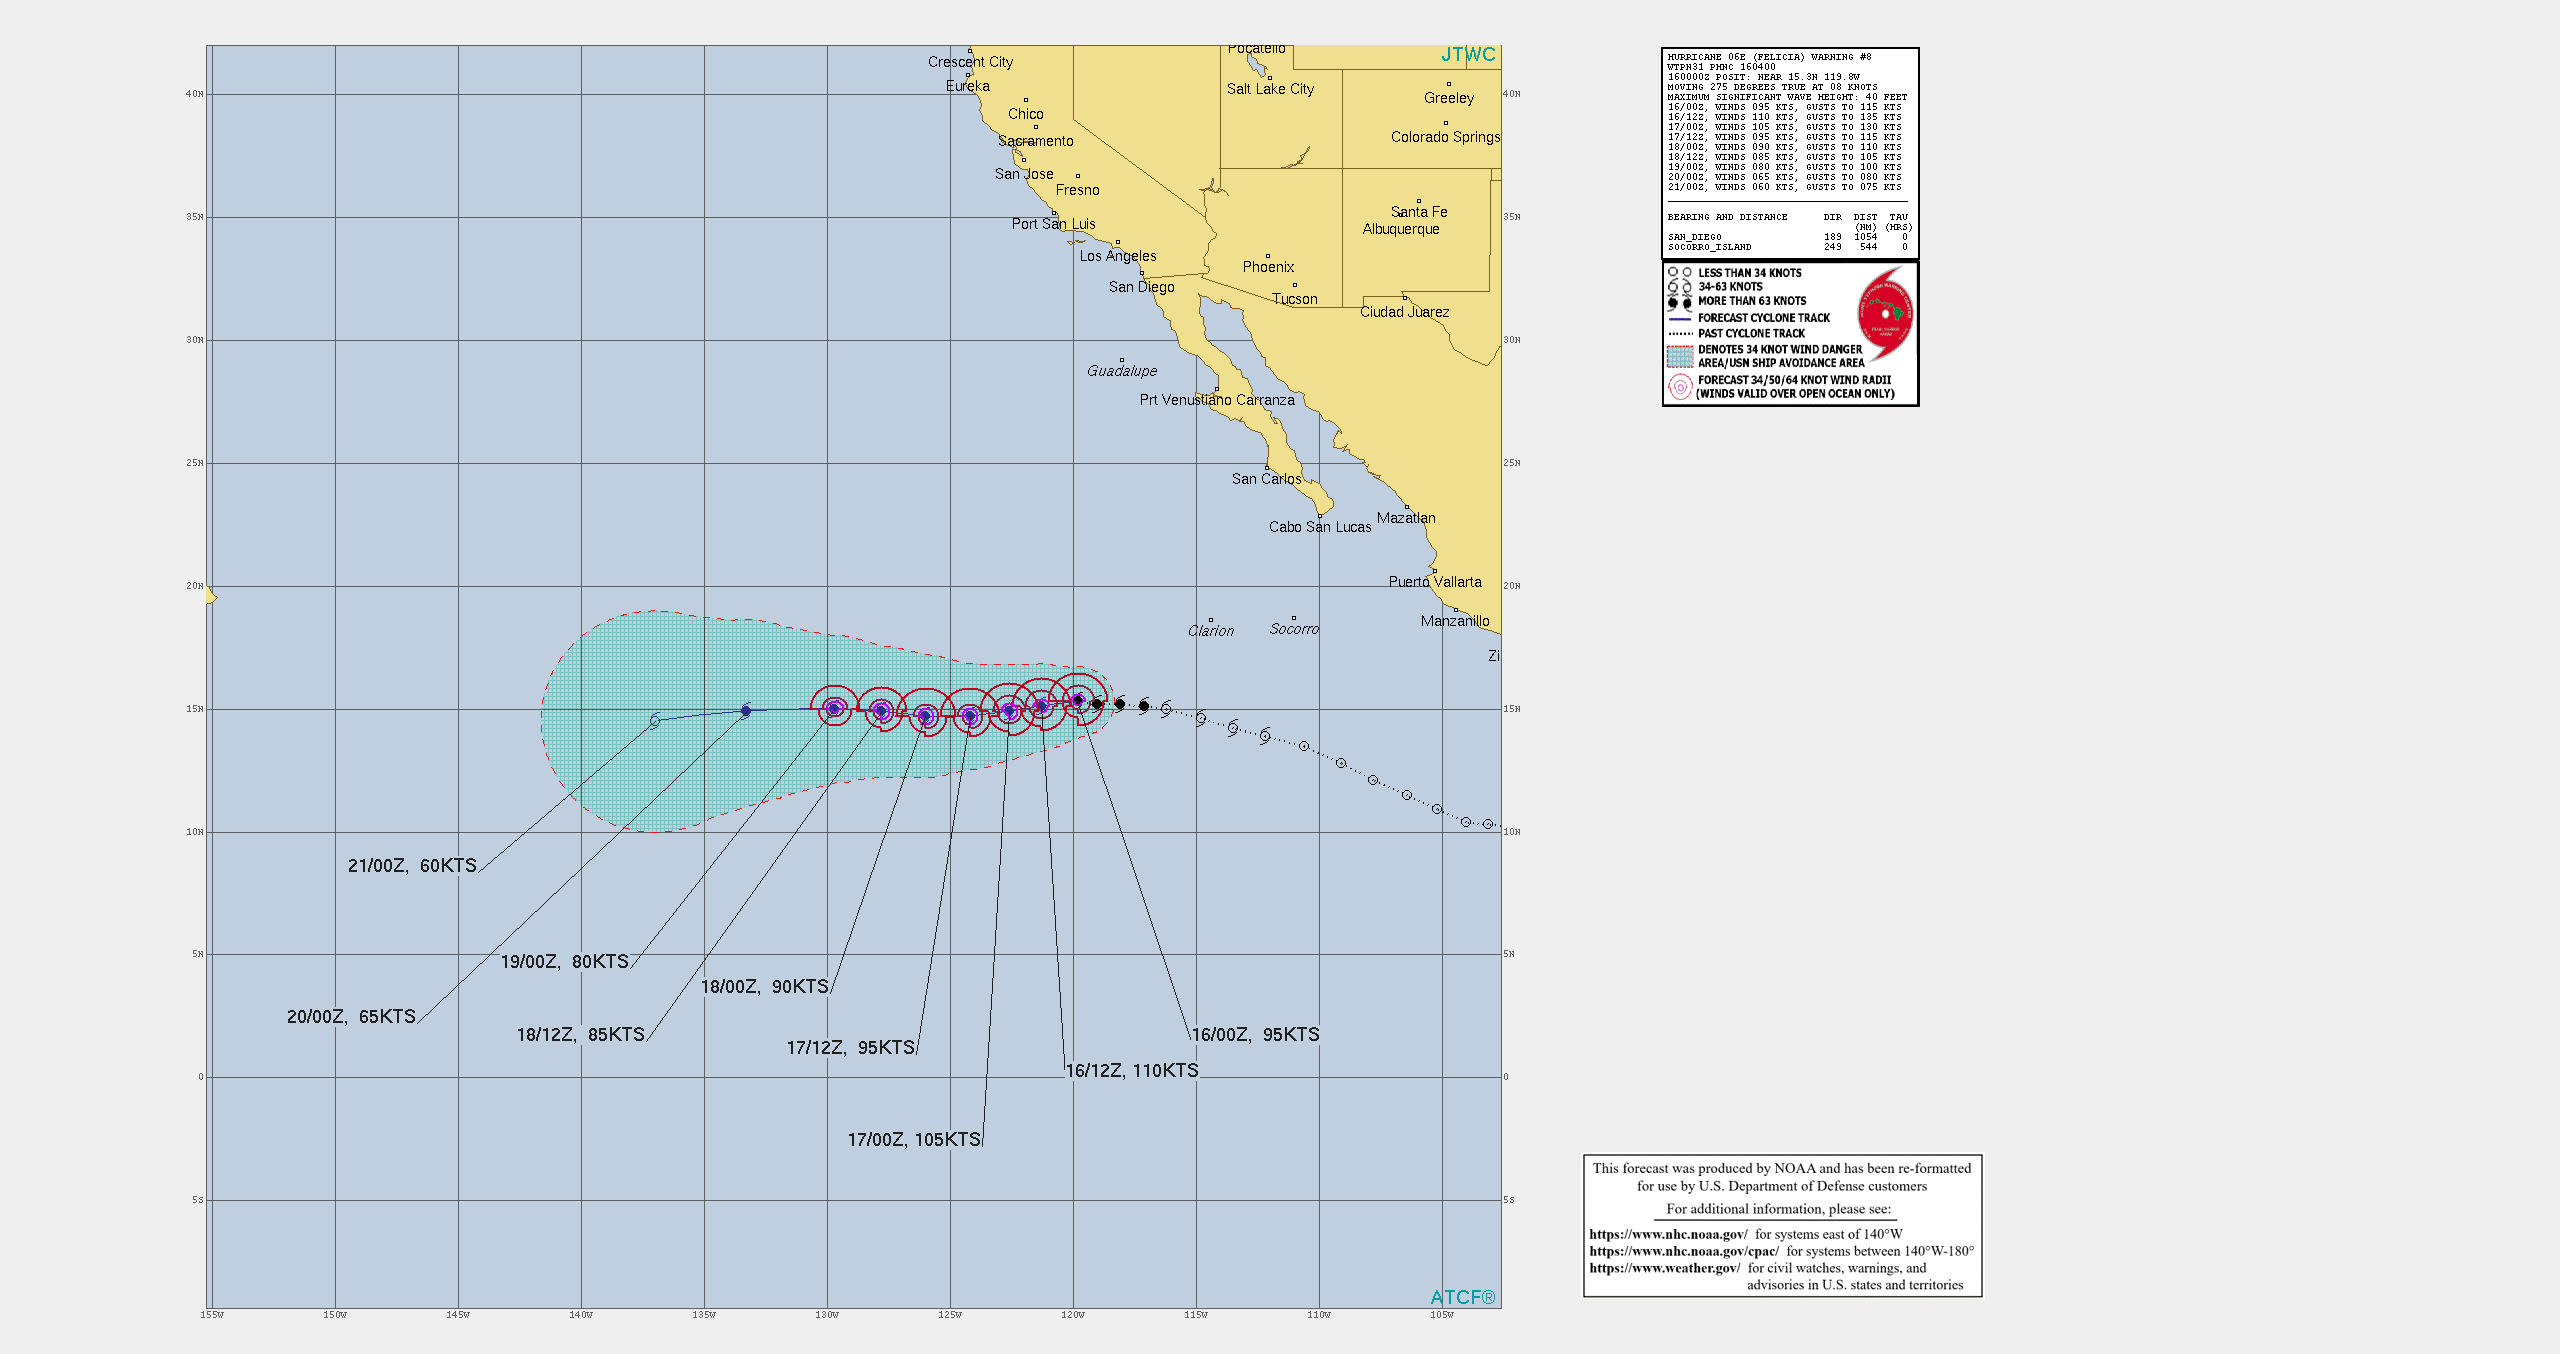 EASTERN NORTH PACIFIC. HU 06E(FELICIA). WARNING 8 ISSUED AT 16/04UTC. INTENSITY IS FORECAST TO BE JUST BELOW HURRICANE CATEGORY 4 WITHIN 12H. INTENSITY IS ANALYZED AT 100KNOTS/CATEGORY 3 AT 16/06UTC. NO THREAT TO LAND.